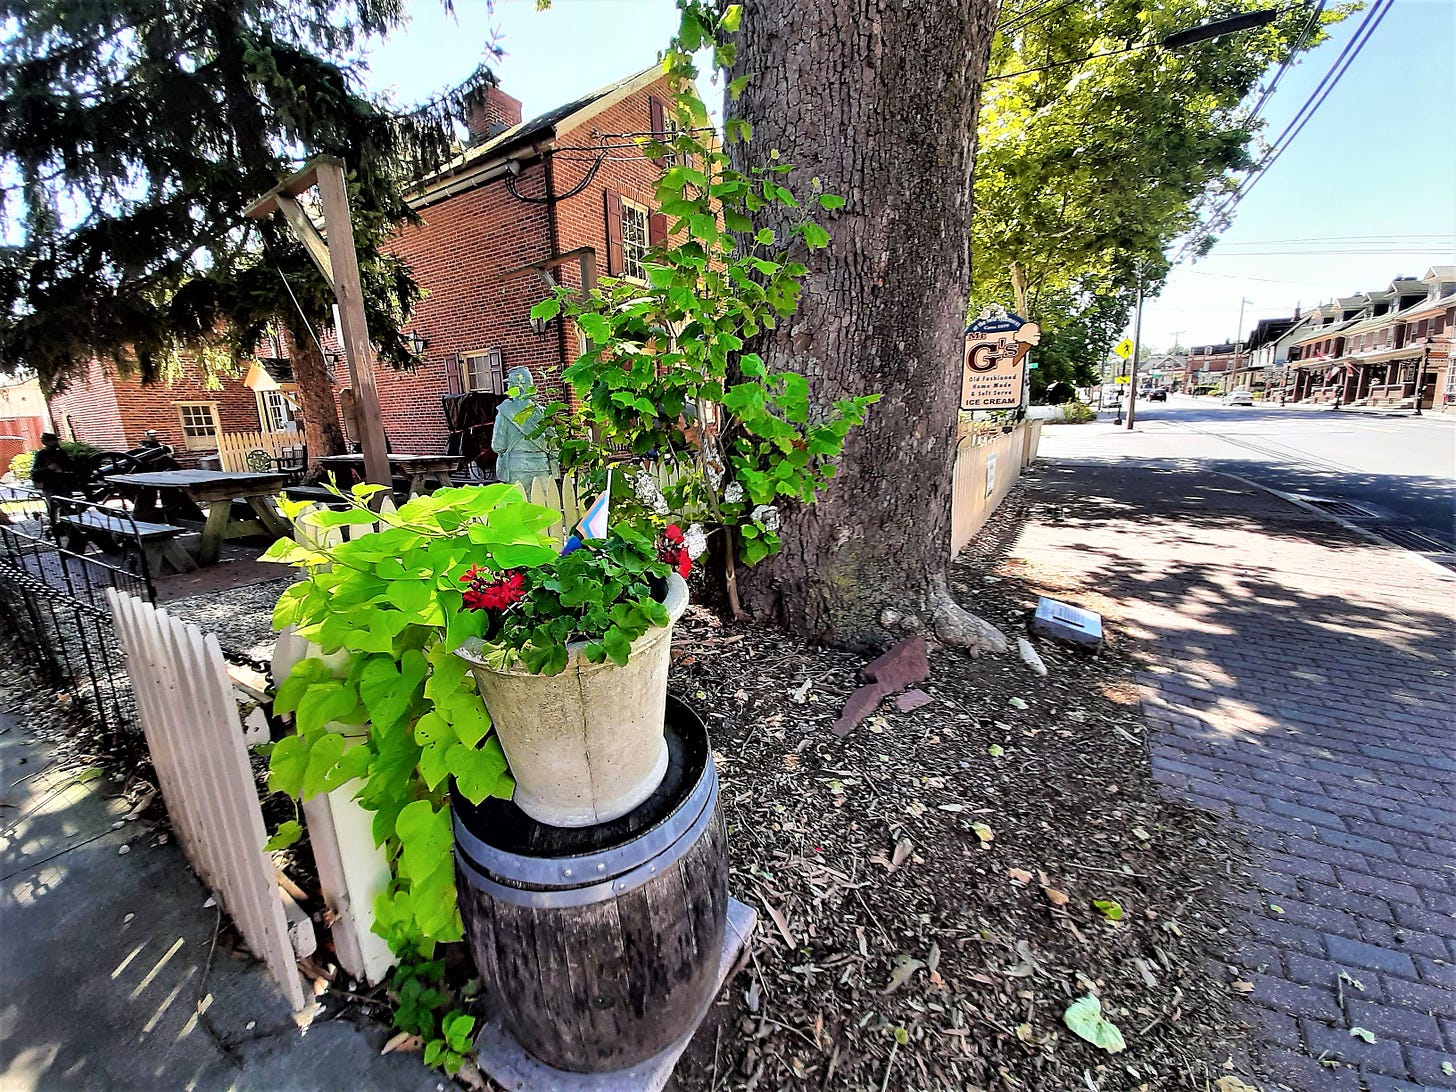 The trunk of a large tree in front of Mr. G's Ice Cream, a brick building, with potted plants in the foreground.